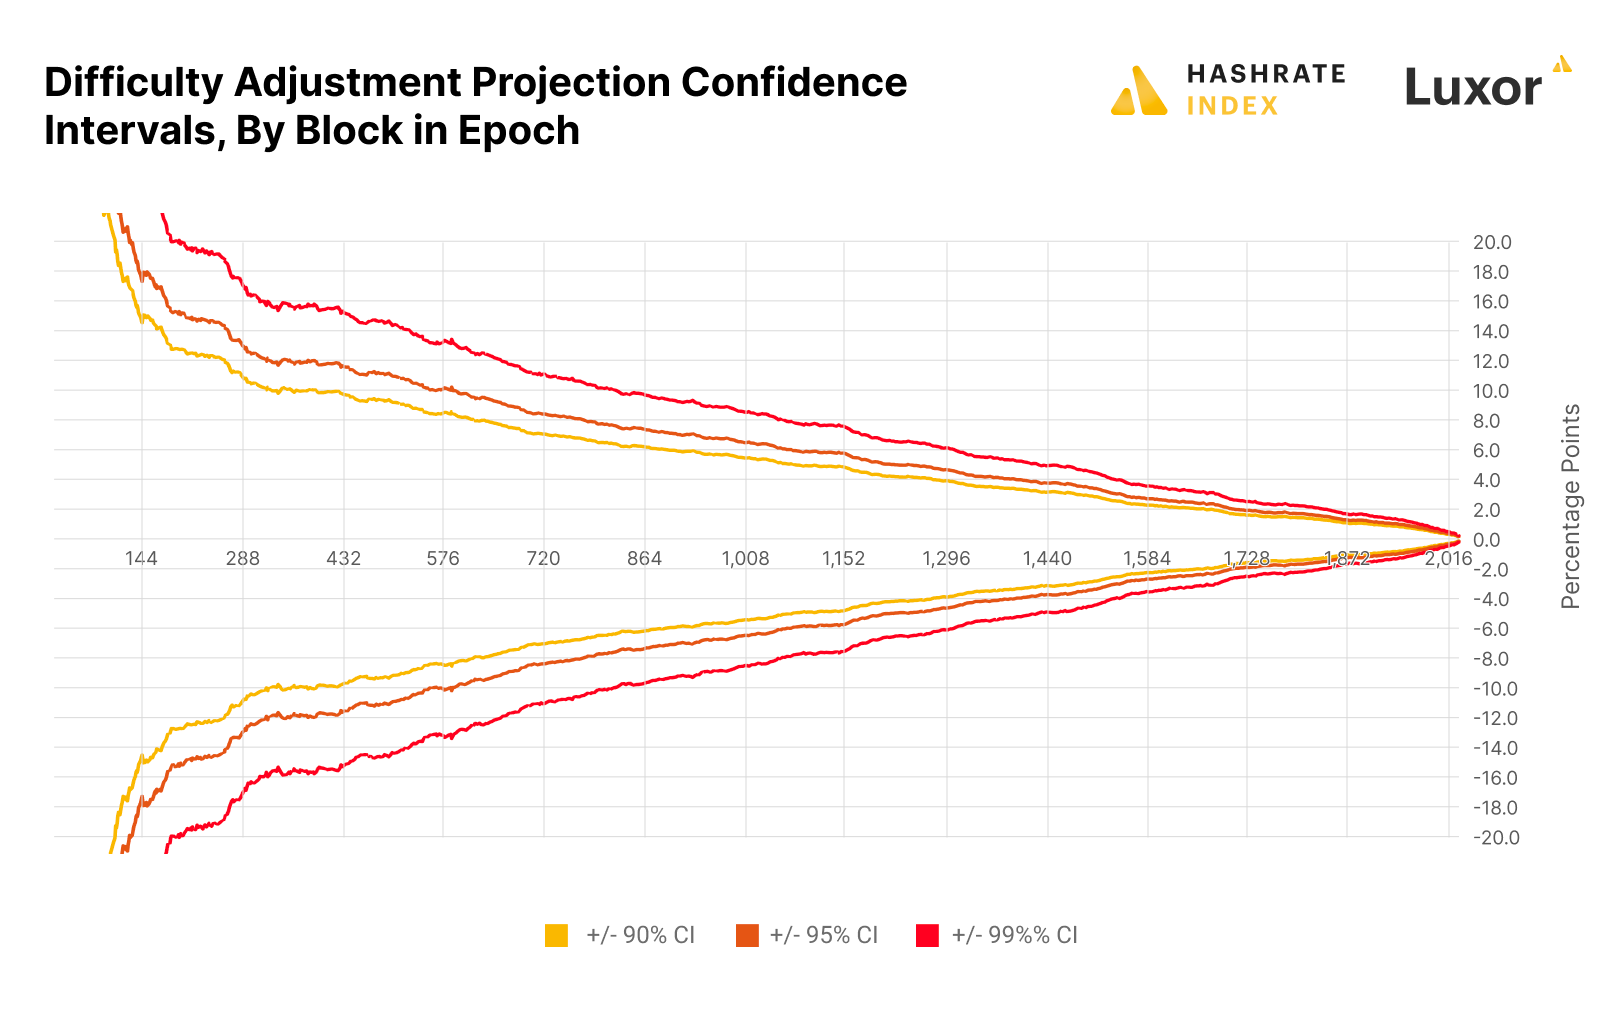 Confidence intervals for difficulty adjustment projections by block during a difficulty epoch | Source: Hashrate Index